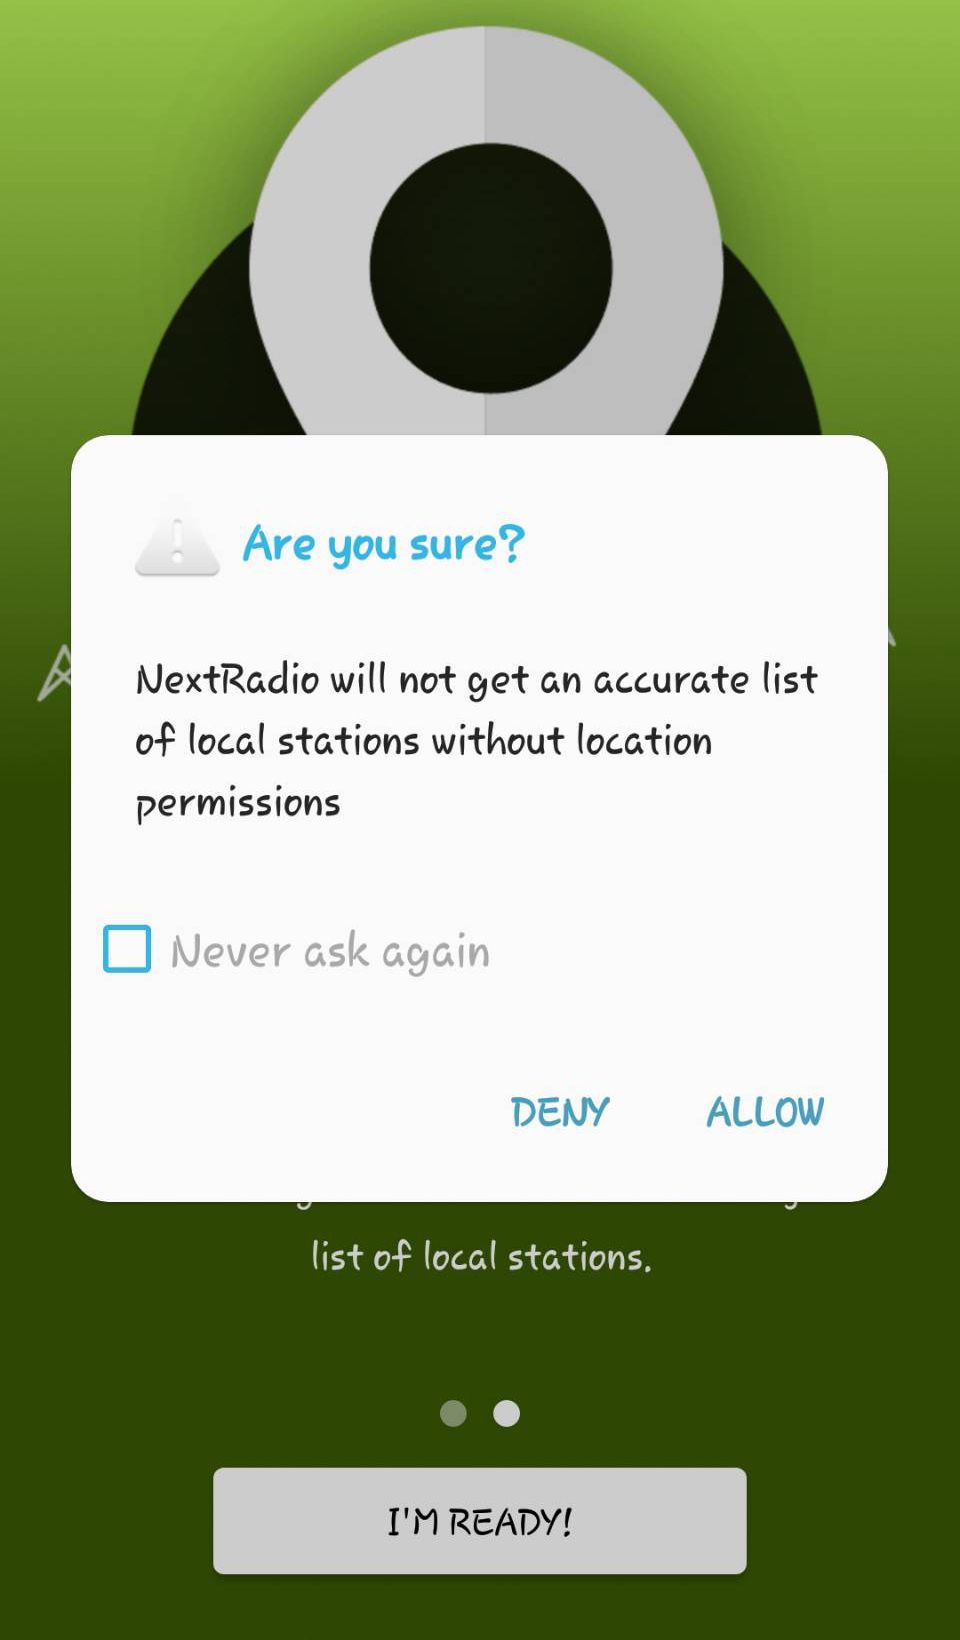 NextRadio final prompt for location denial